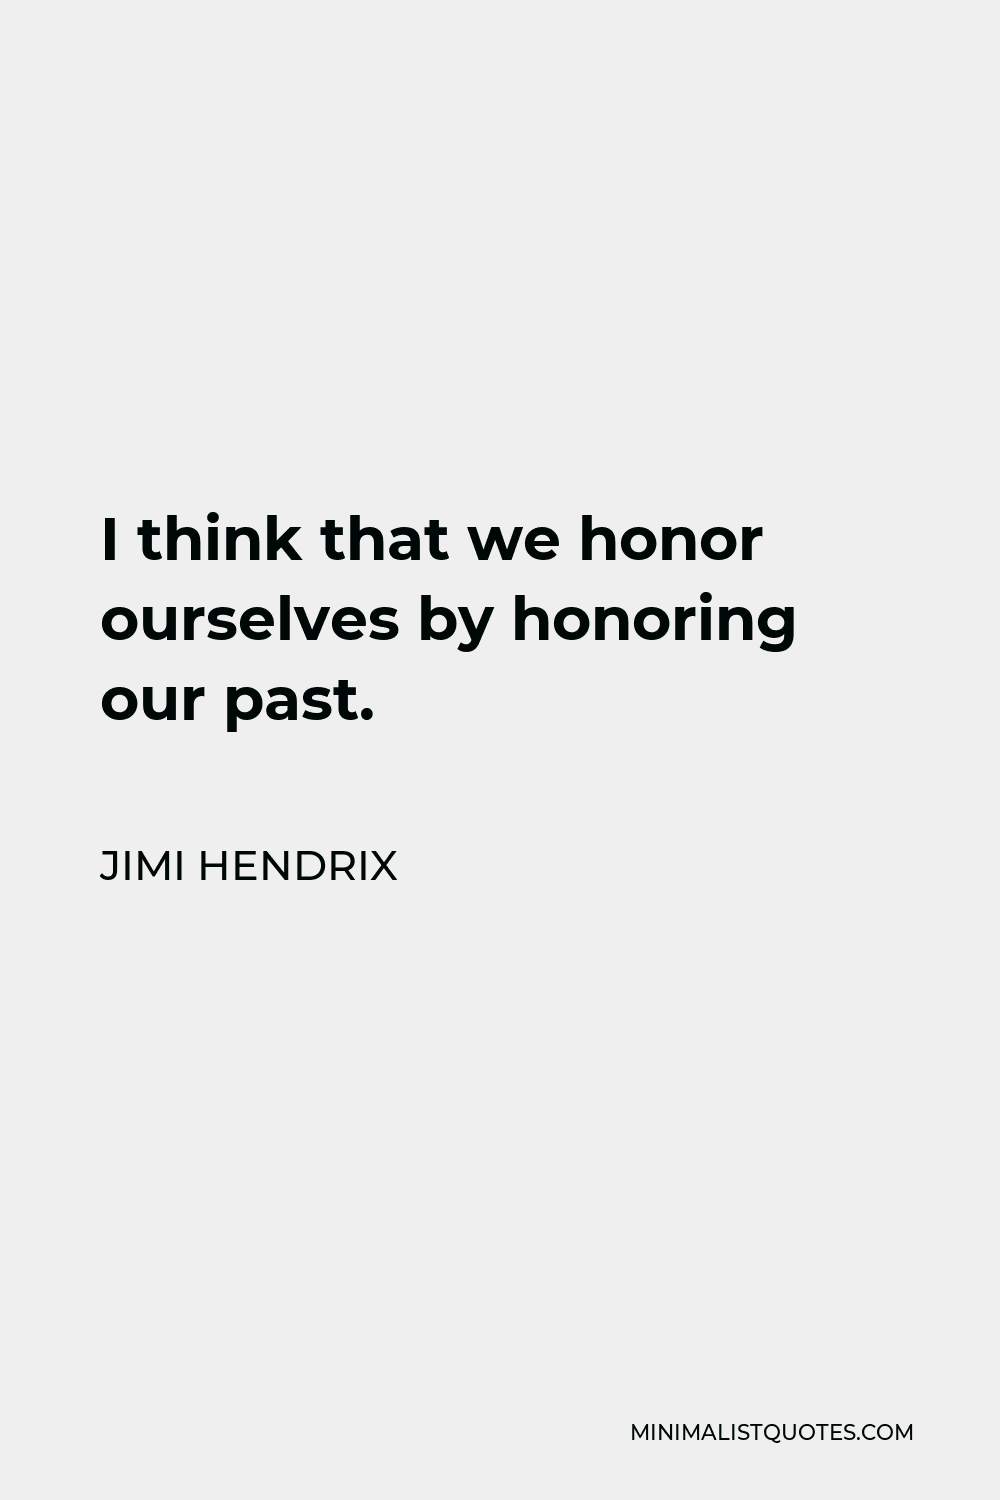 Jimi Hendrix Quote - I think that we honor ourselves by honoring our past.